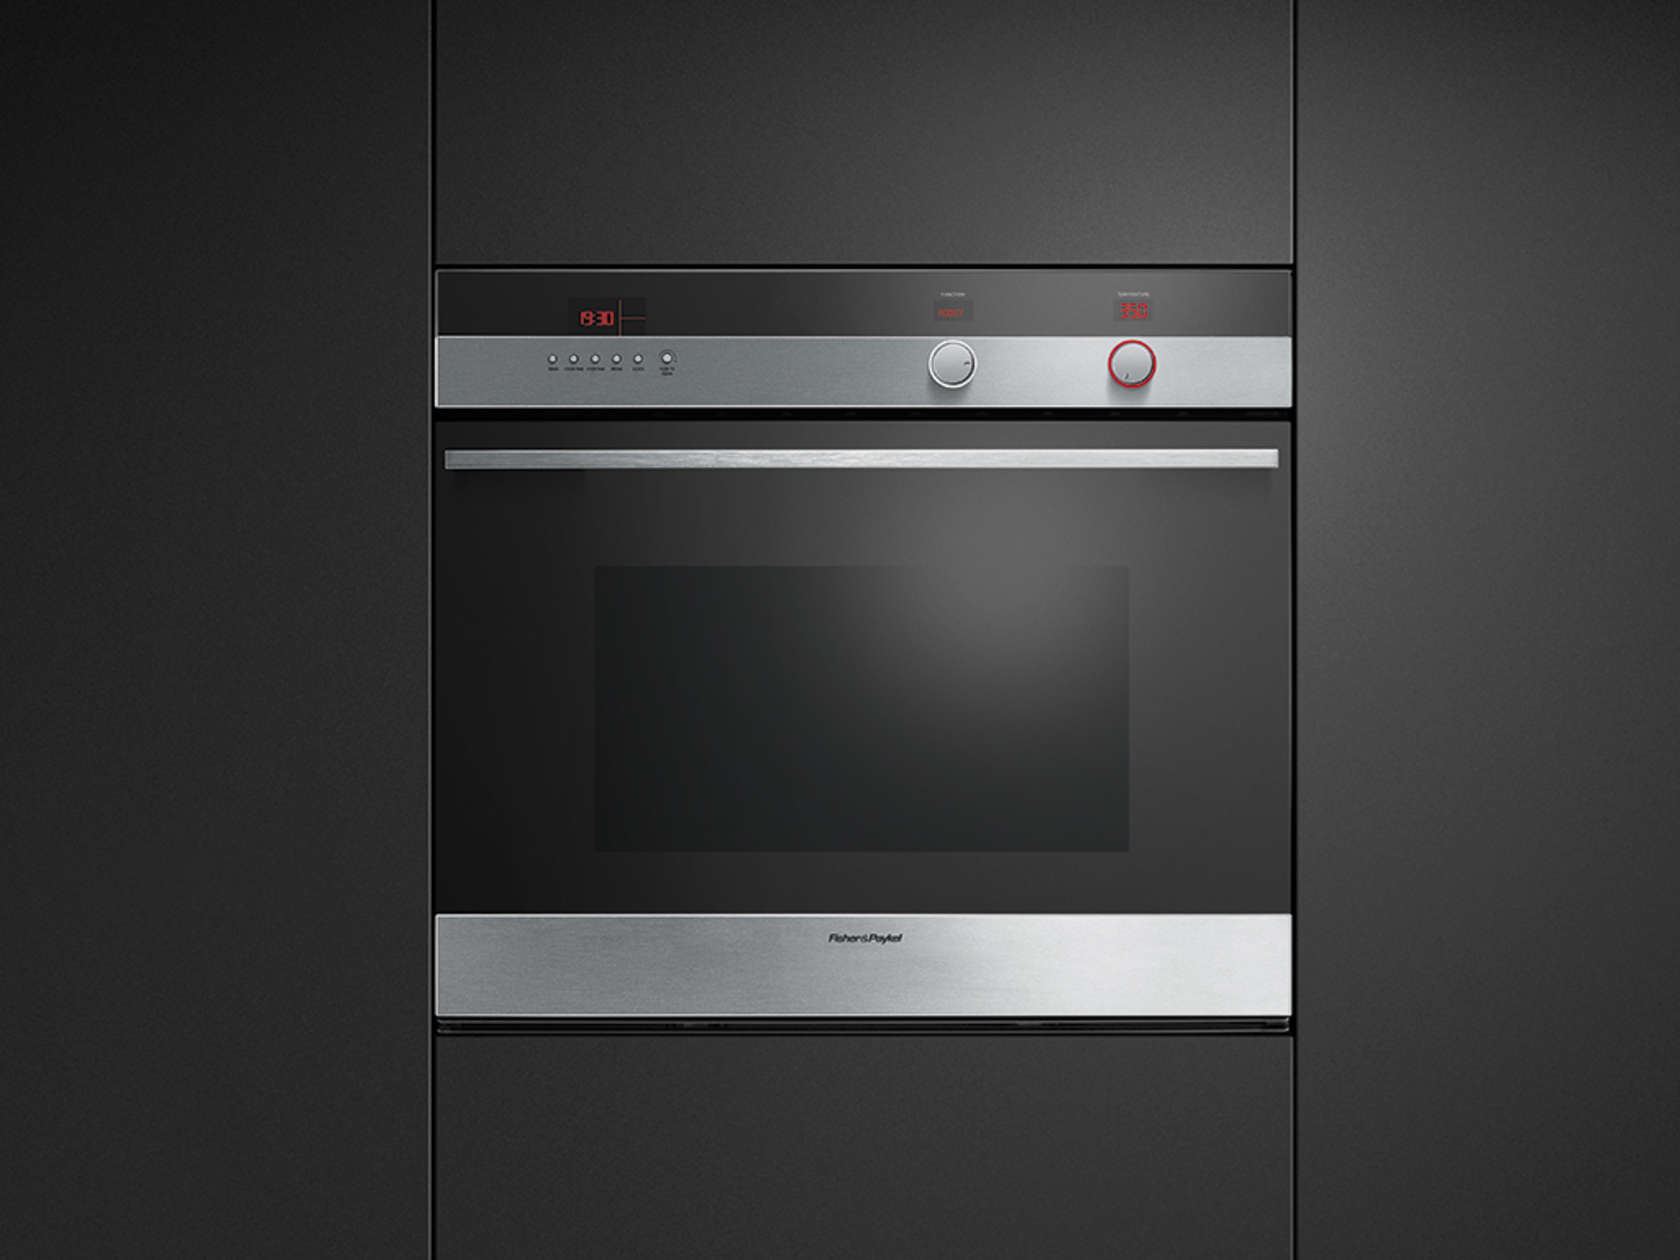 Built-in Ovens - Architizer